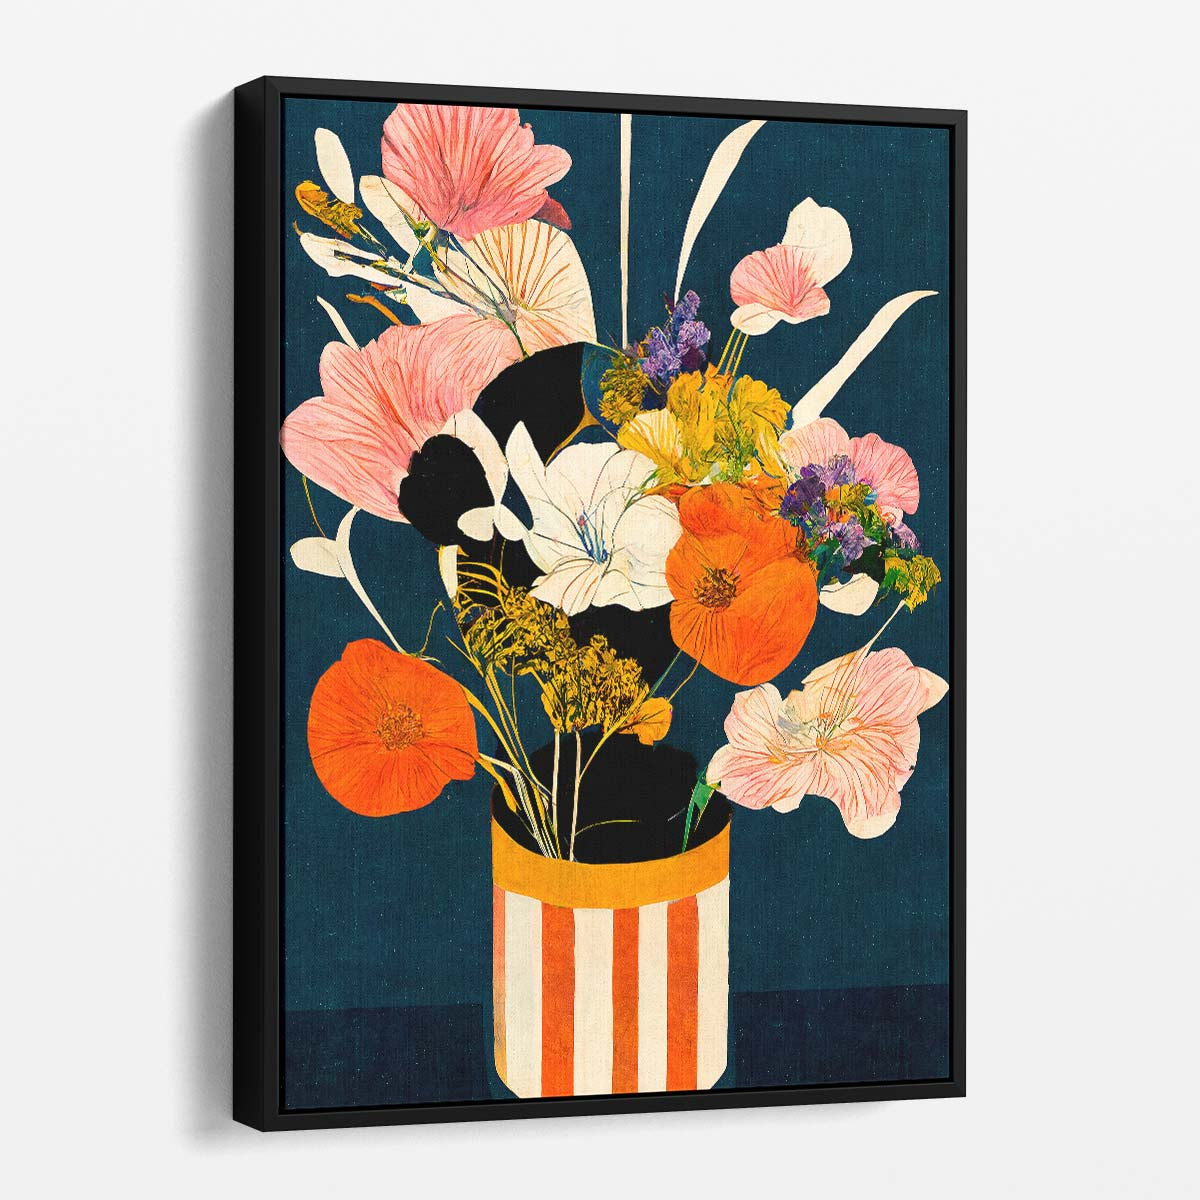 Japandi Style Colorful Floral Illustration by Treechild by Luxuriance Designs, made in USA